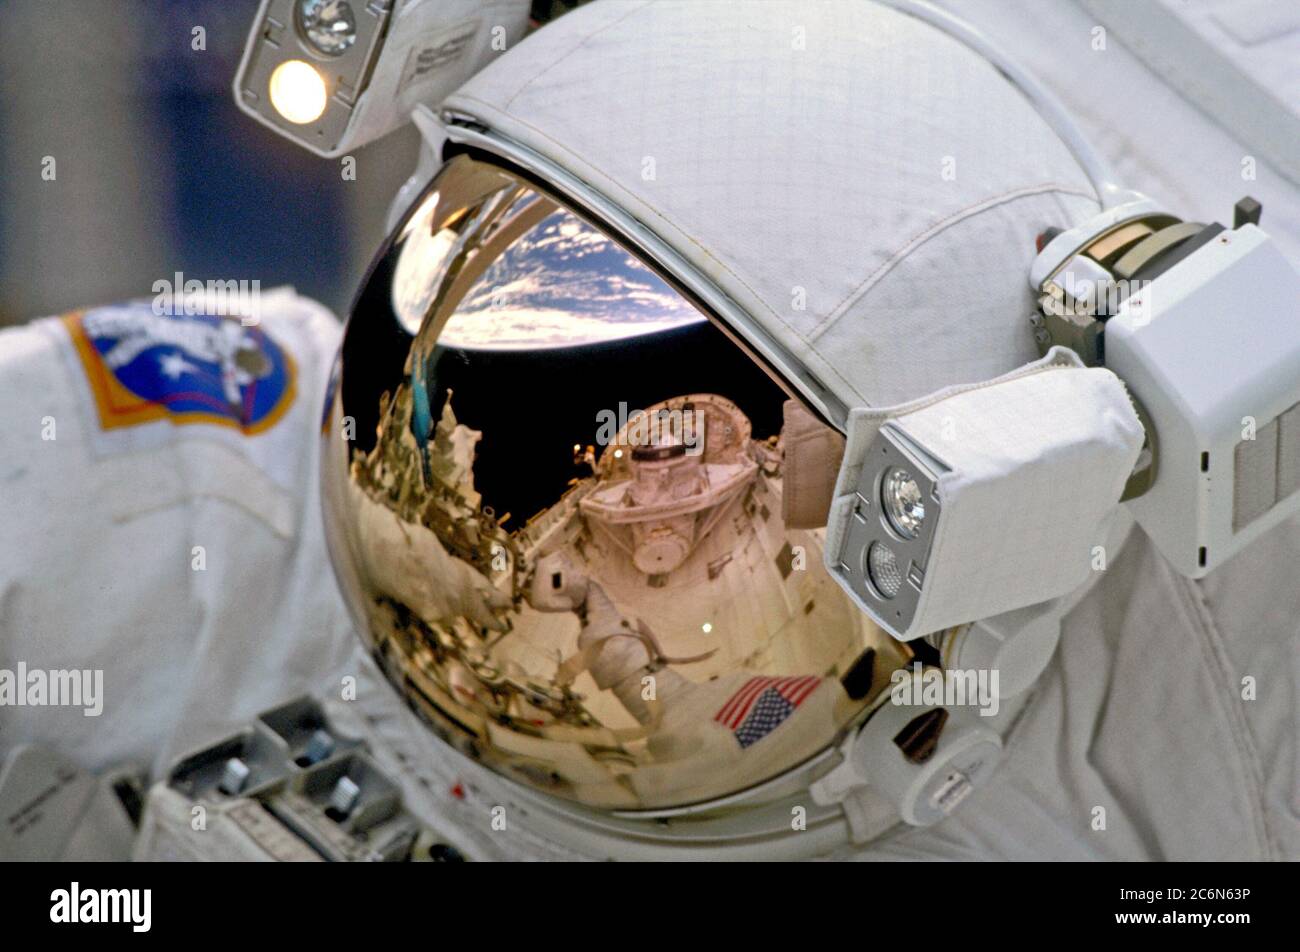 (19- 27 December 1999) - The Space Shuttle Discovery's Cargo Bay and Crew Module, and the Earth's horizon are reflected in the helmet visor of one of the space walking astronauts on STS-103. Astronauts Steven L. Smith, John M. Grunsfeld, C. Michael Foale and Claude Nicollier participated in three days of extravehicular activity on the NASA's third servicing visit to the Hubble Space Telescope (HST). Stock Photo